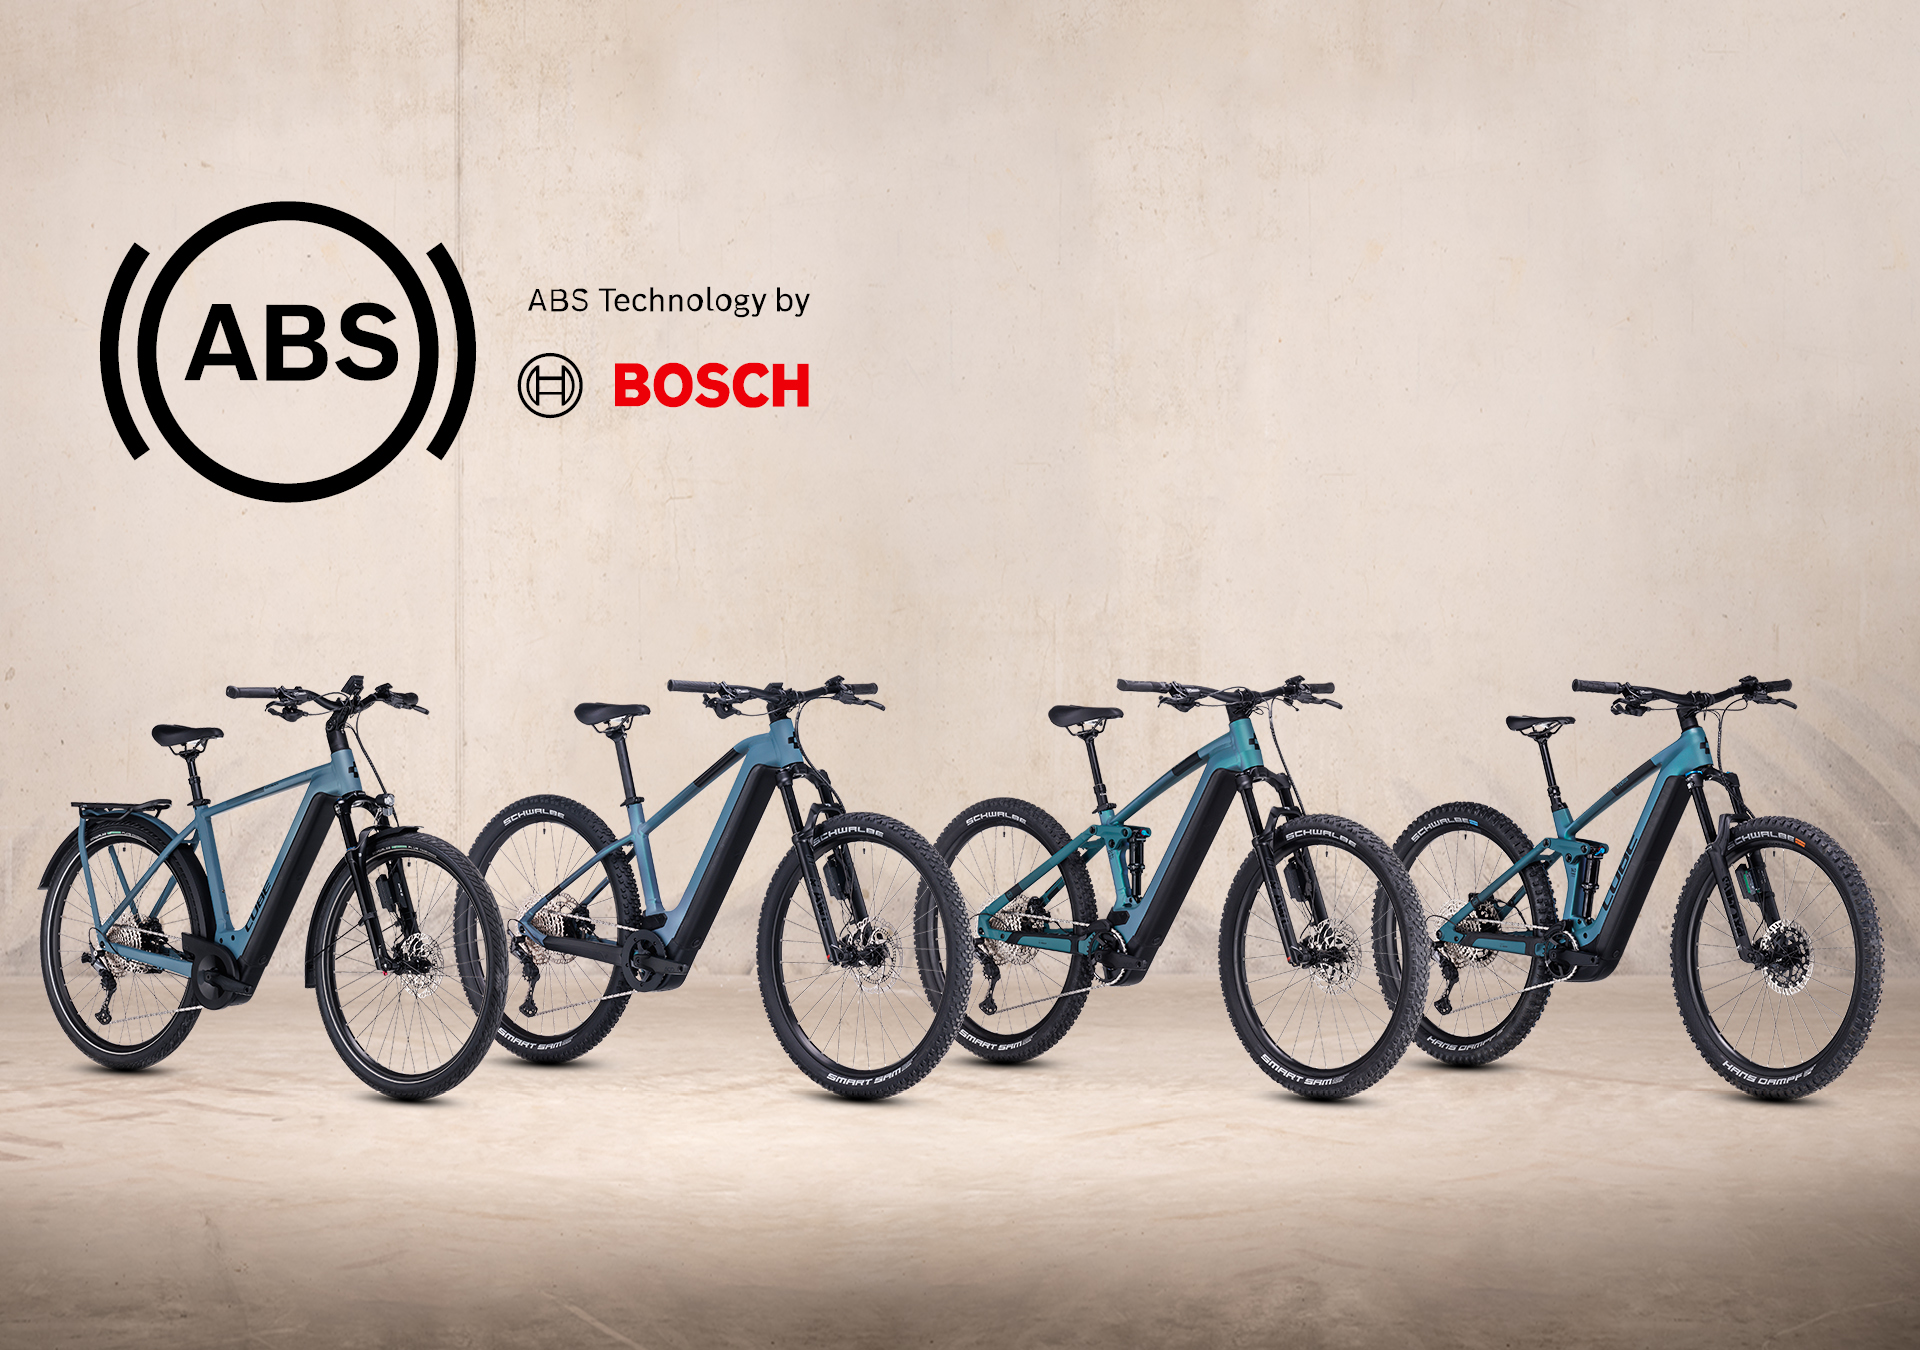 Cube launches four new e-bikes equipped with an ABS electric bike reviews, buying advice and news